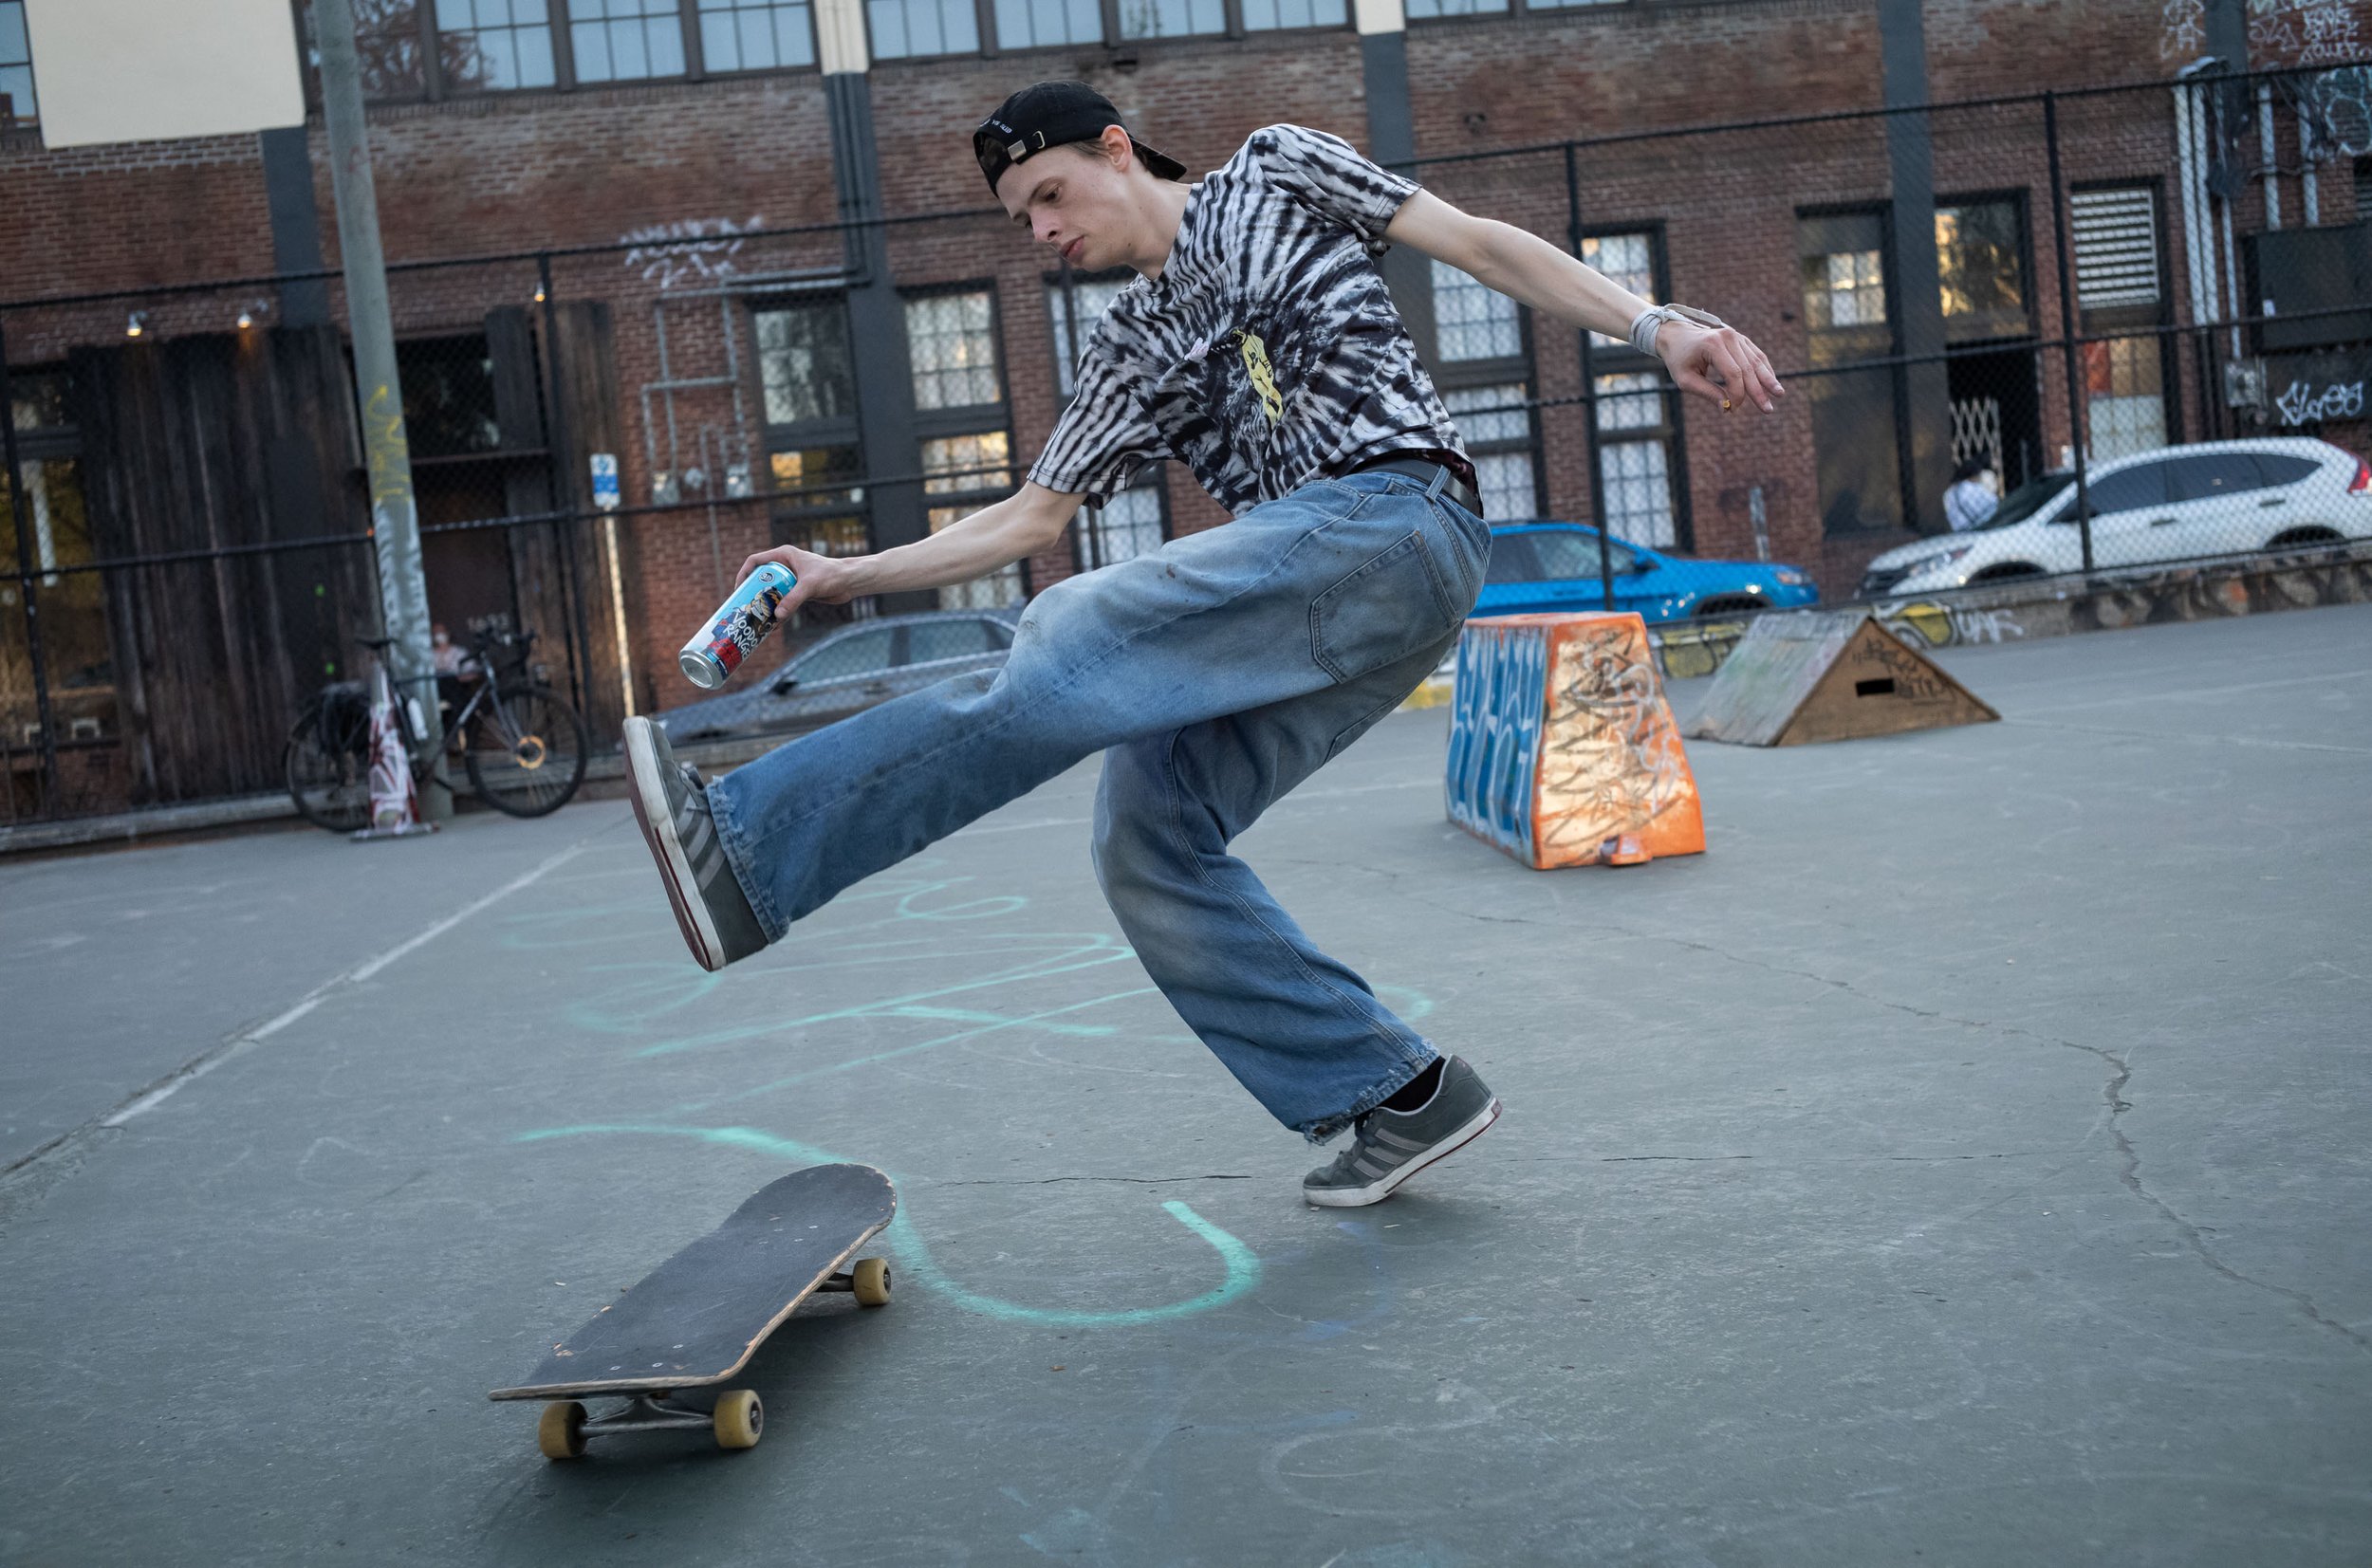  Skateboarding at Cal Anderson Park in Seattle, Washington, USA on May 12, 2023. 